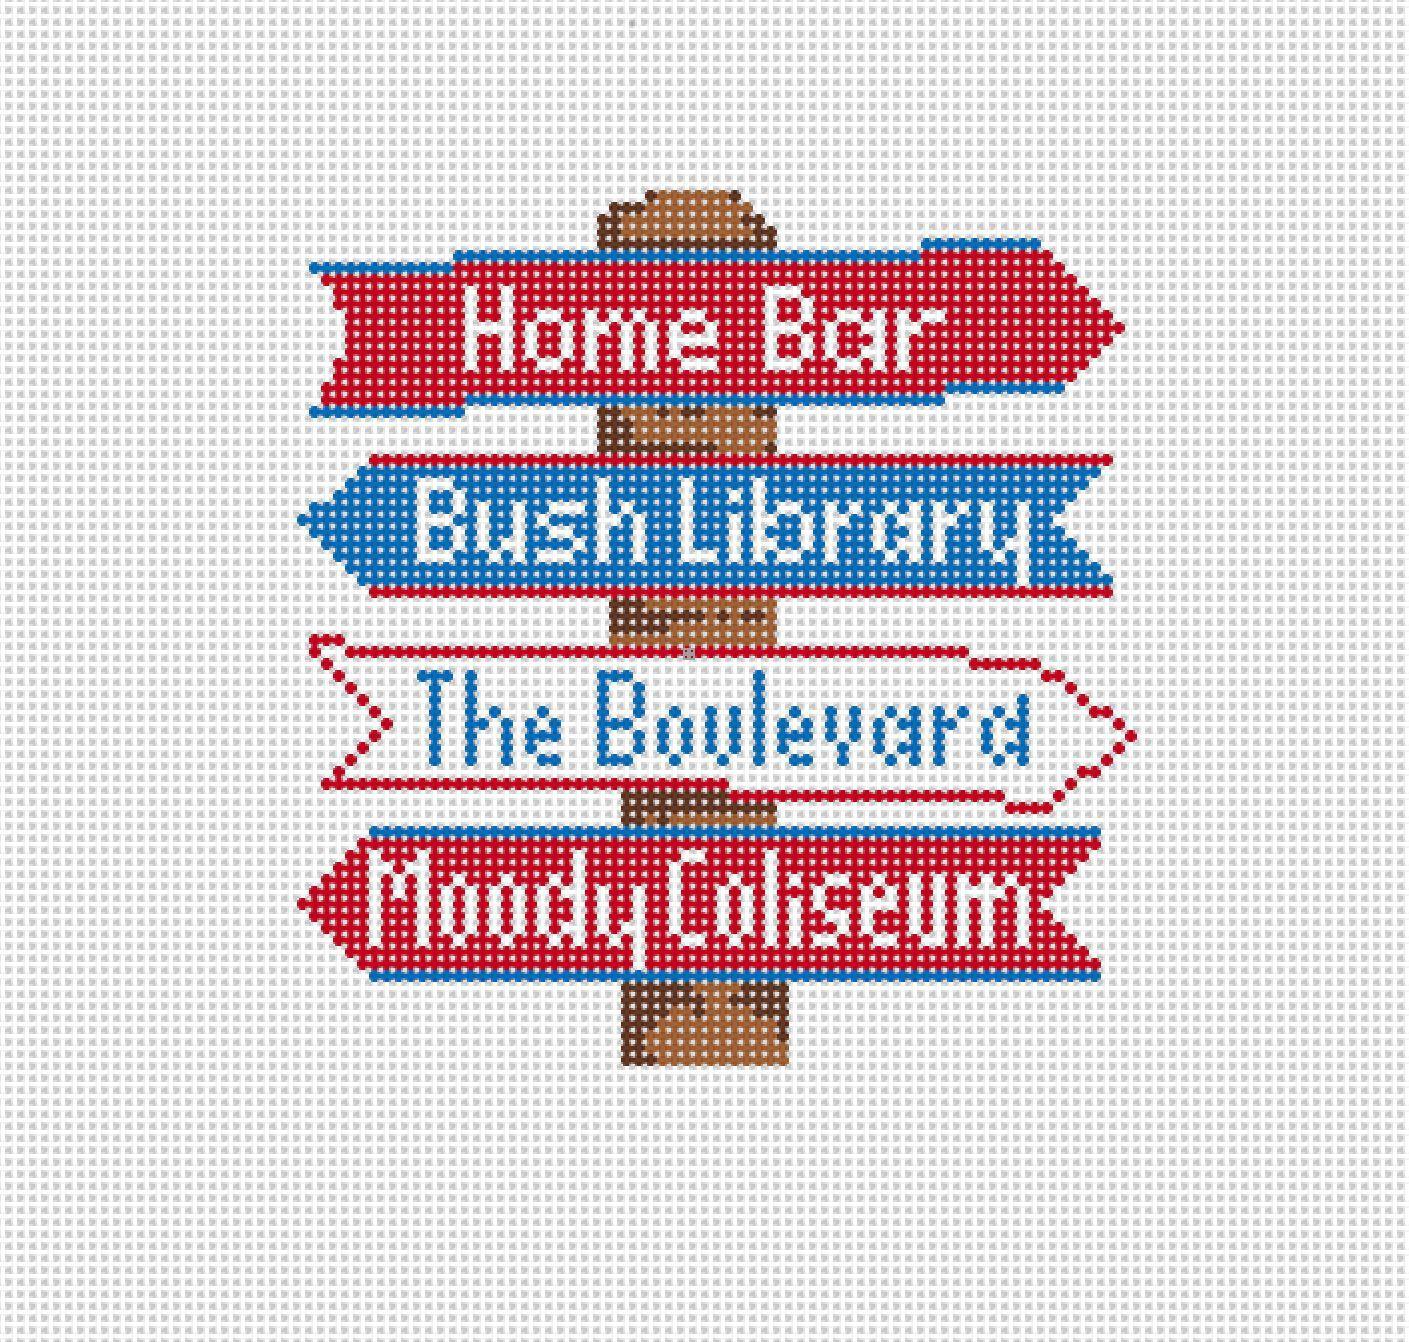 SMU College Icon Destination Sign - Needlepoint by Laura